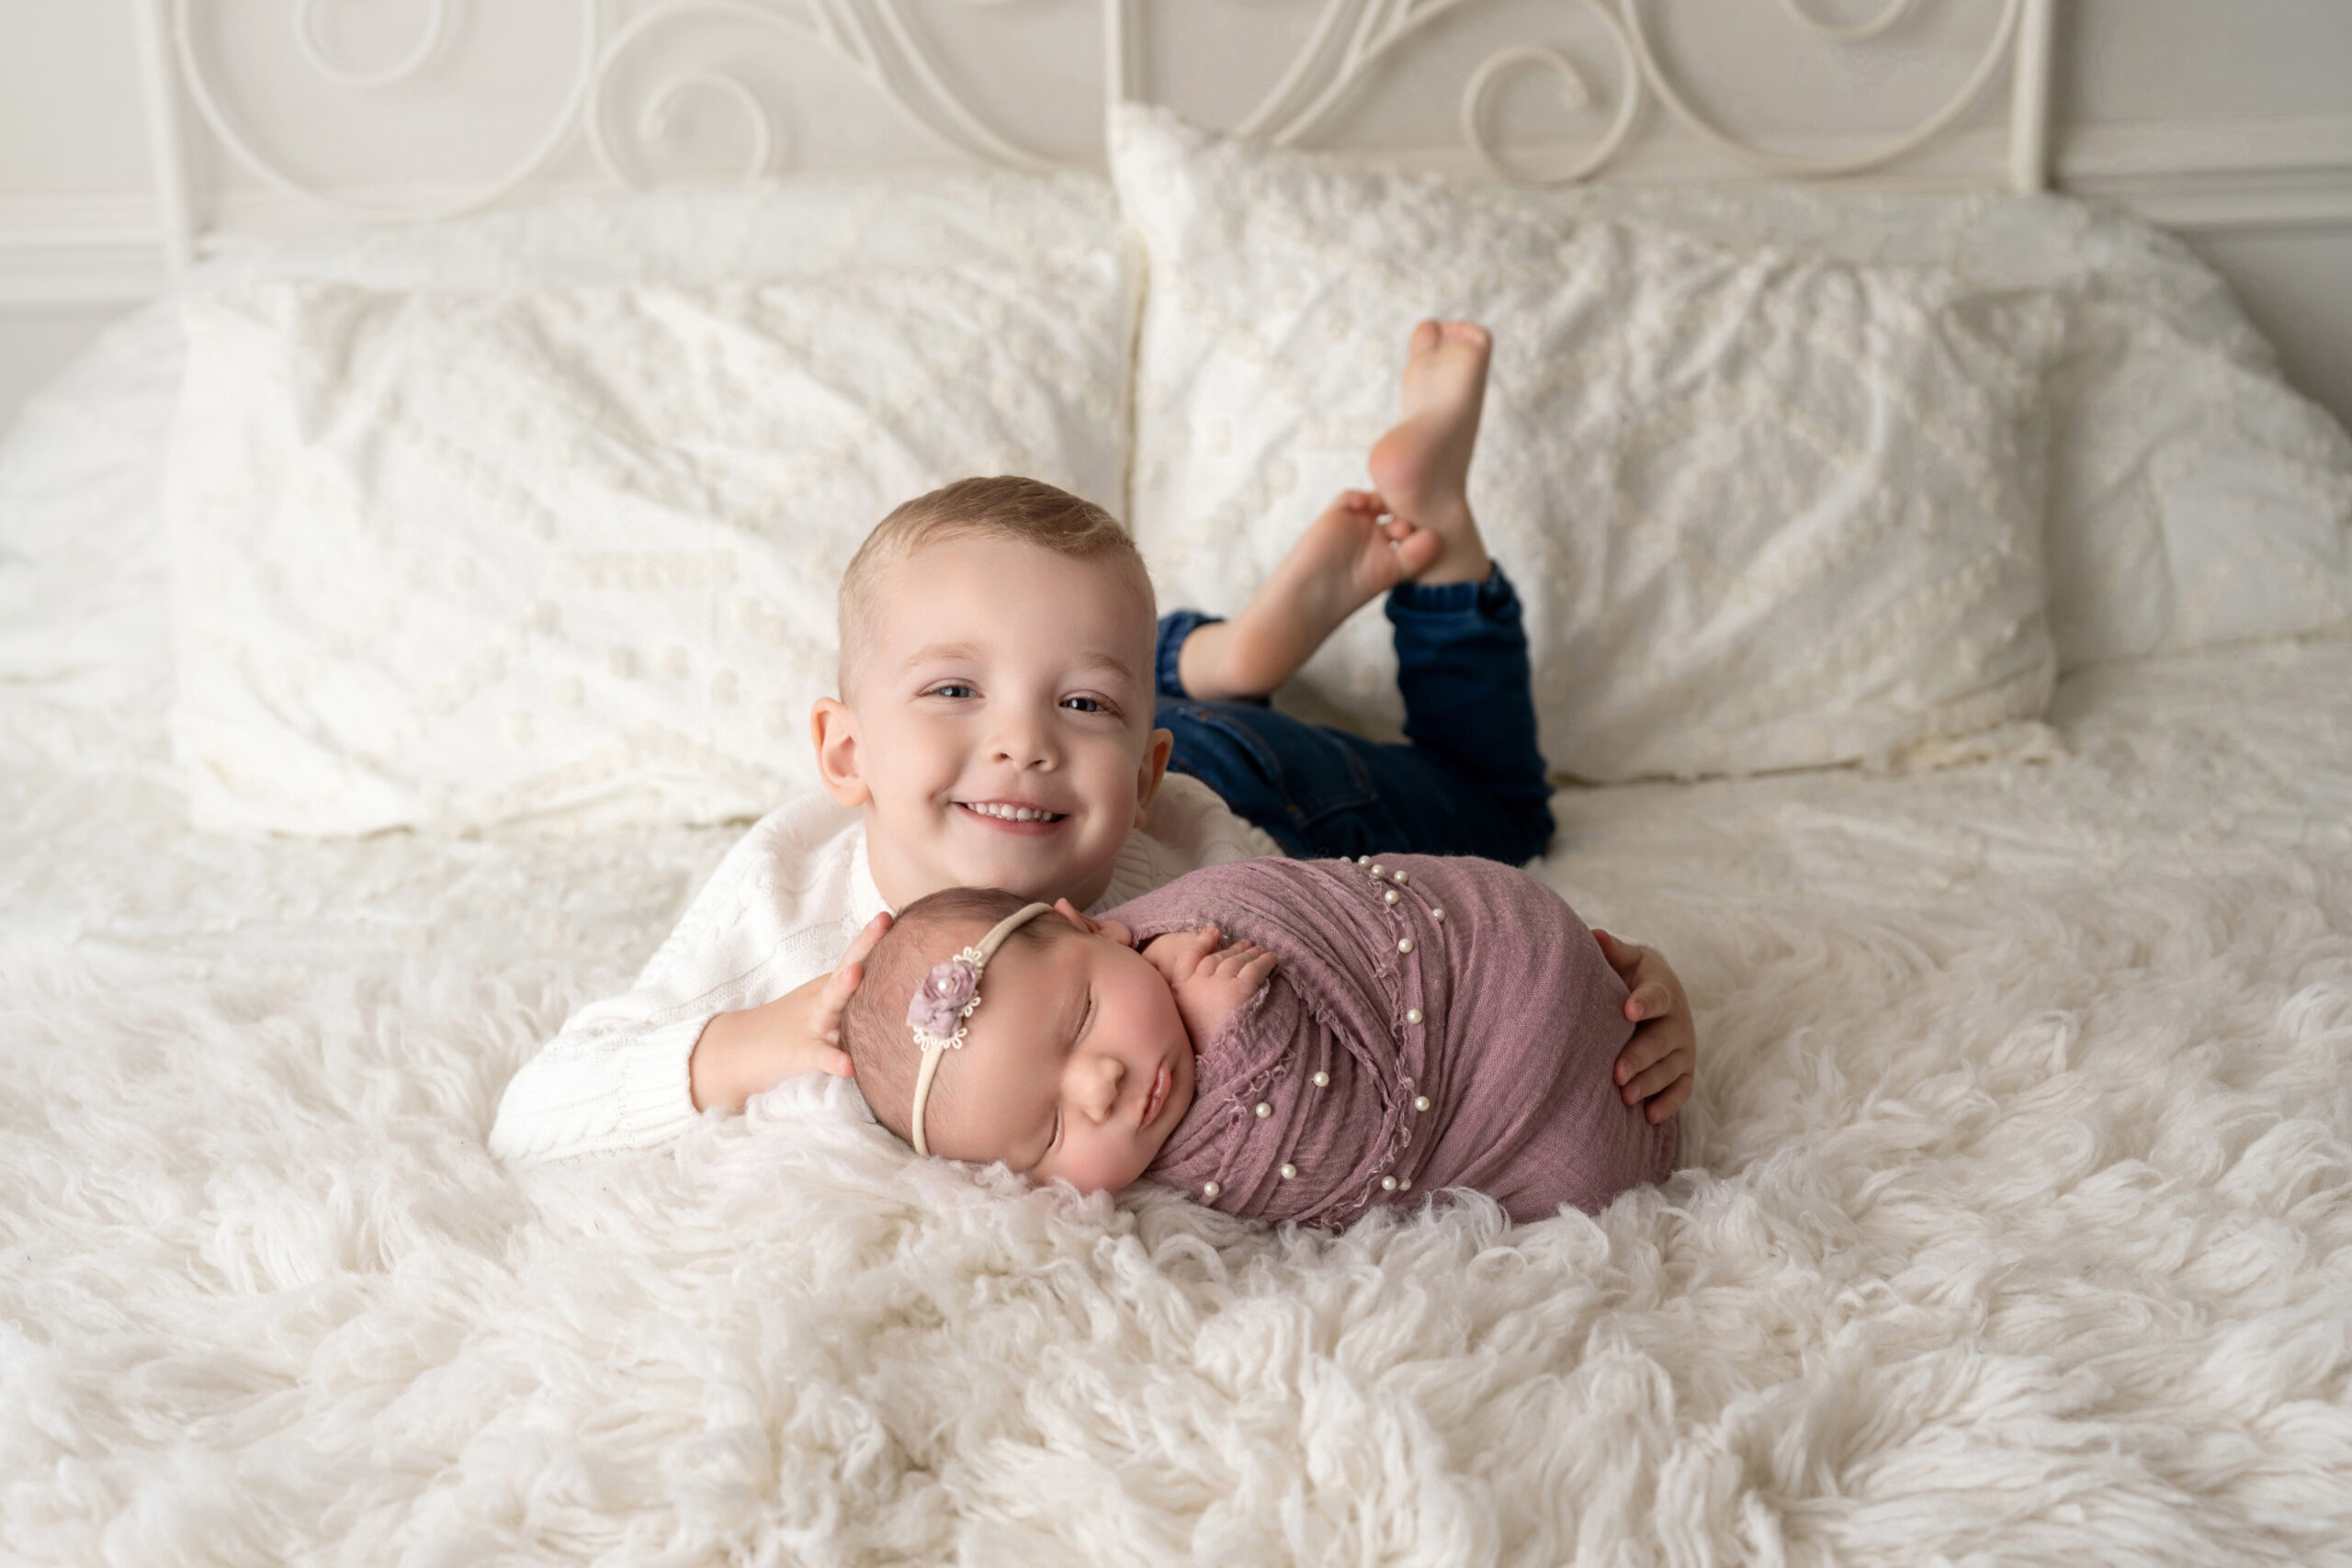 Big brother poses on bed with newborn baby sister